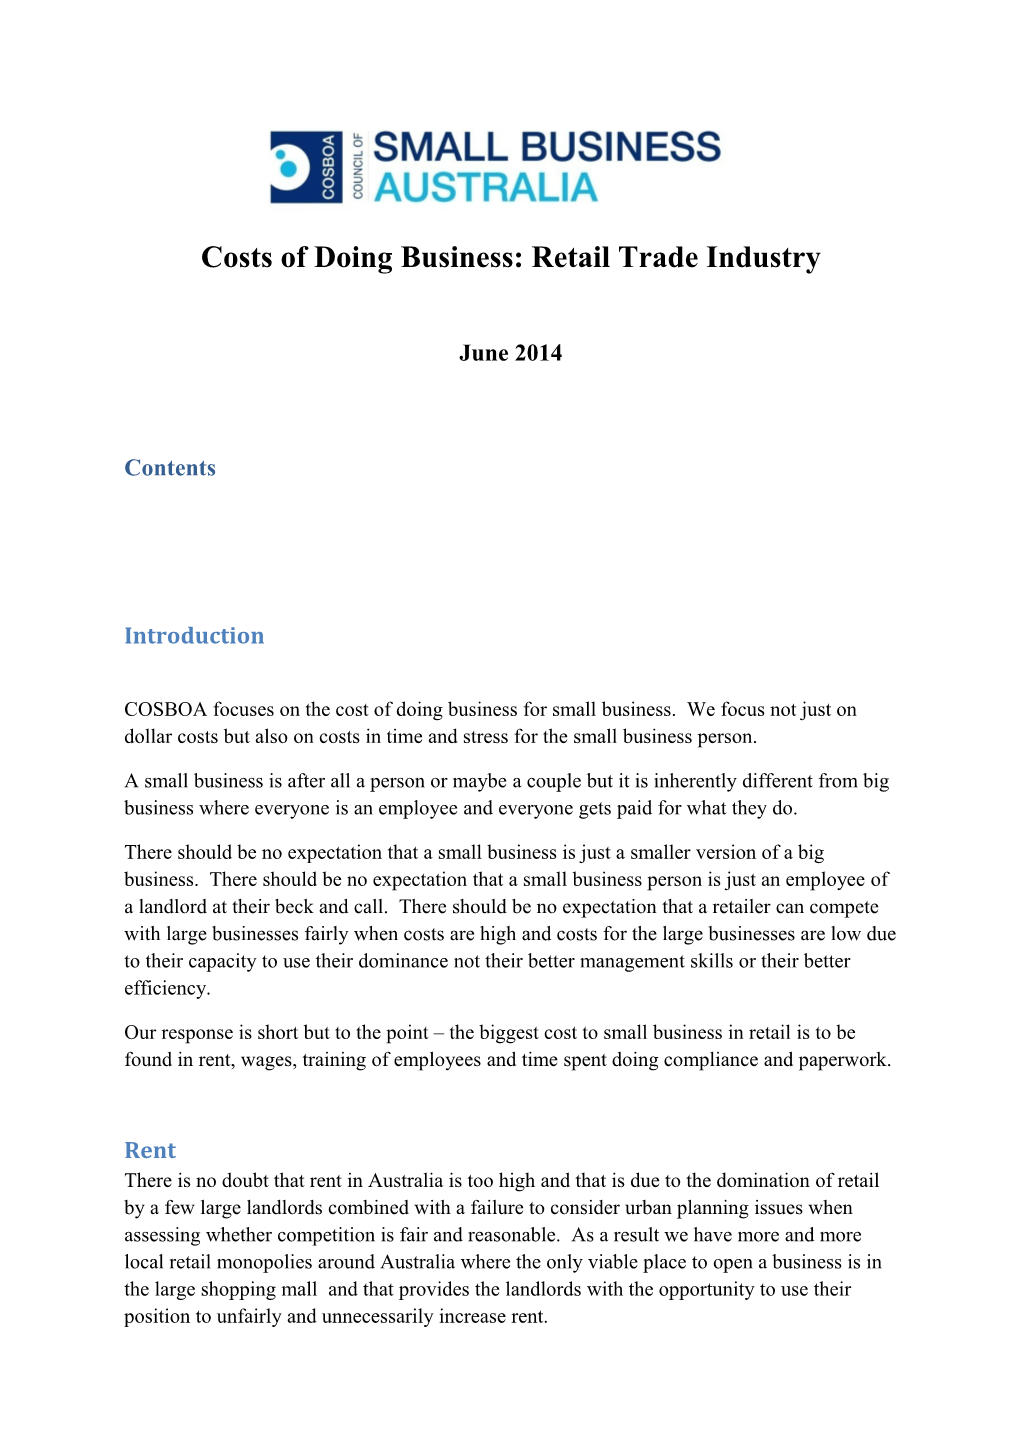 Submission DR20 - Council of Small Business of Australia (COSBOA) - Costs of Doing Business